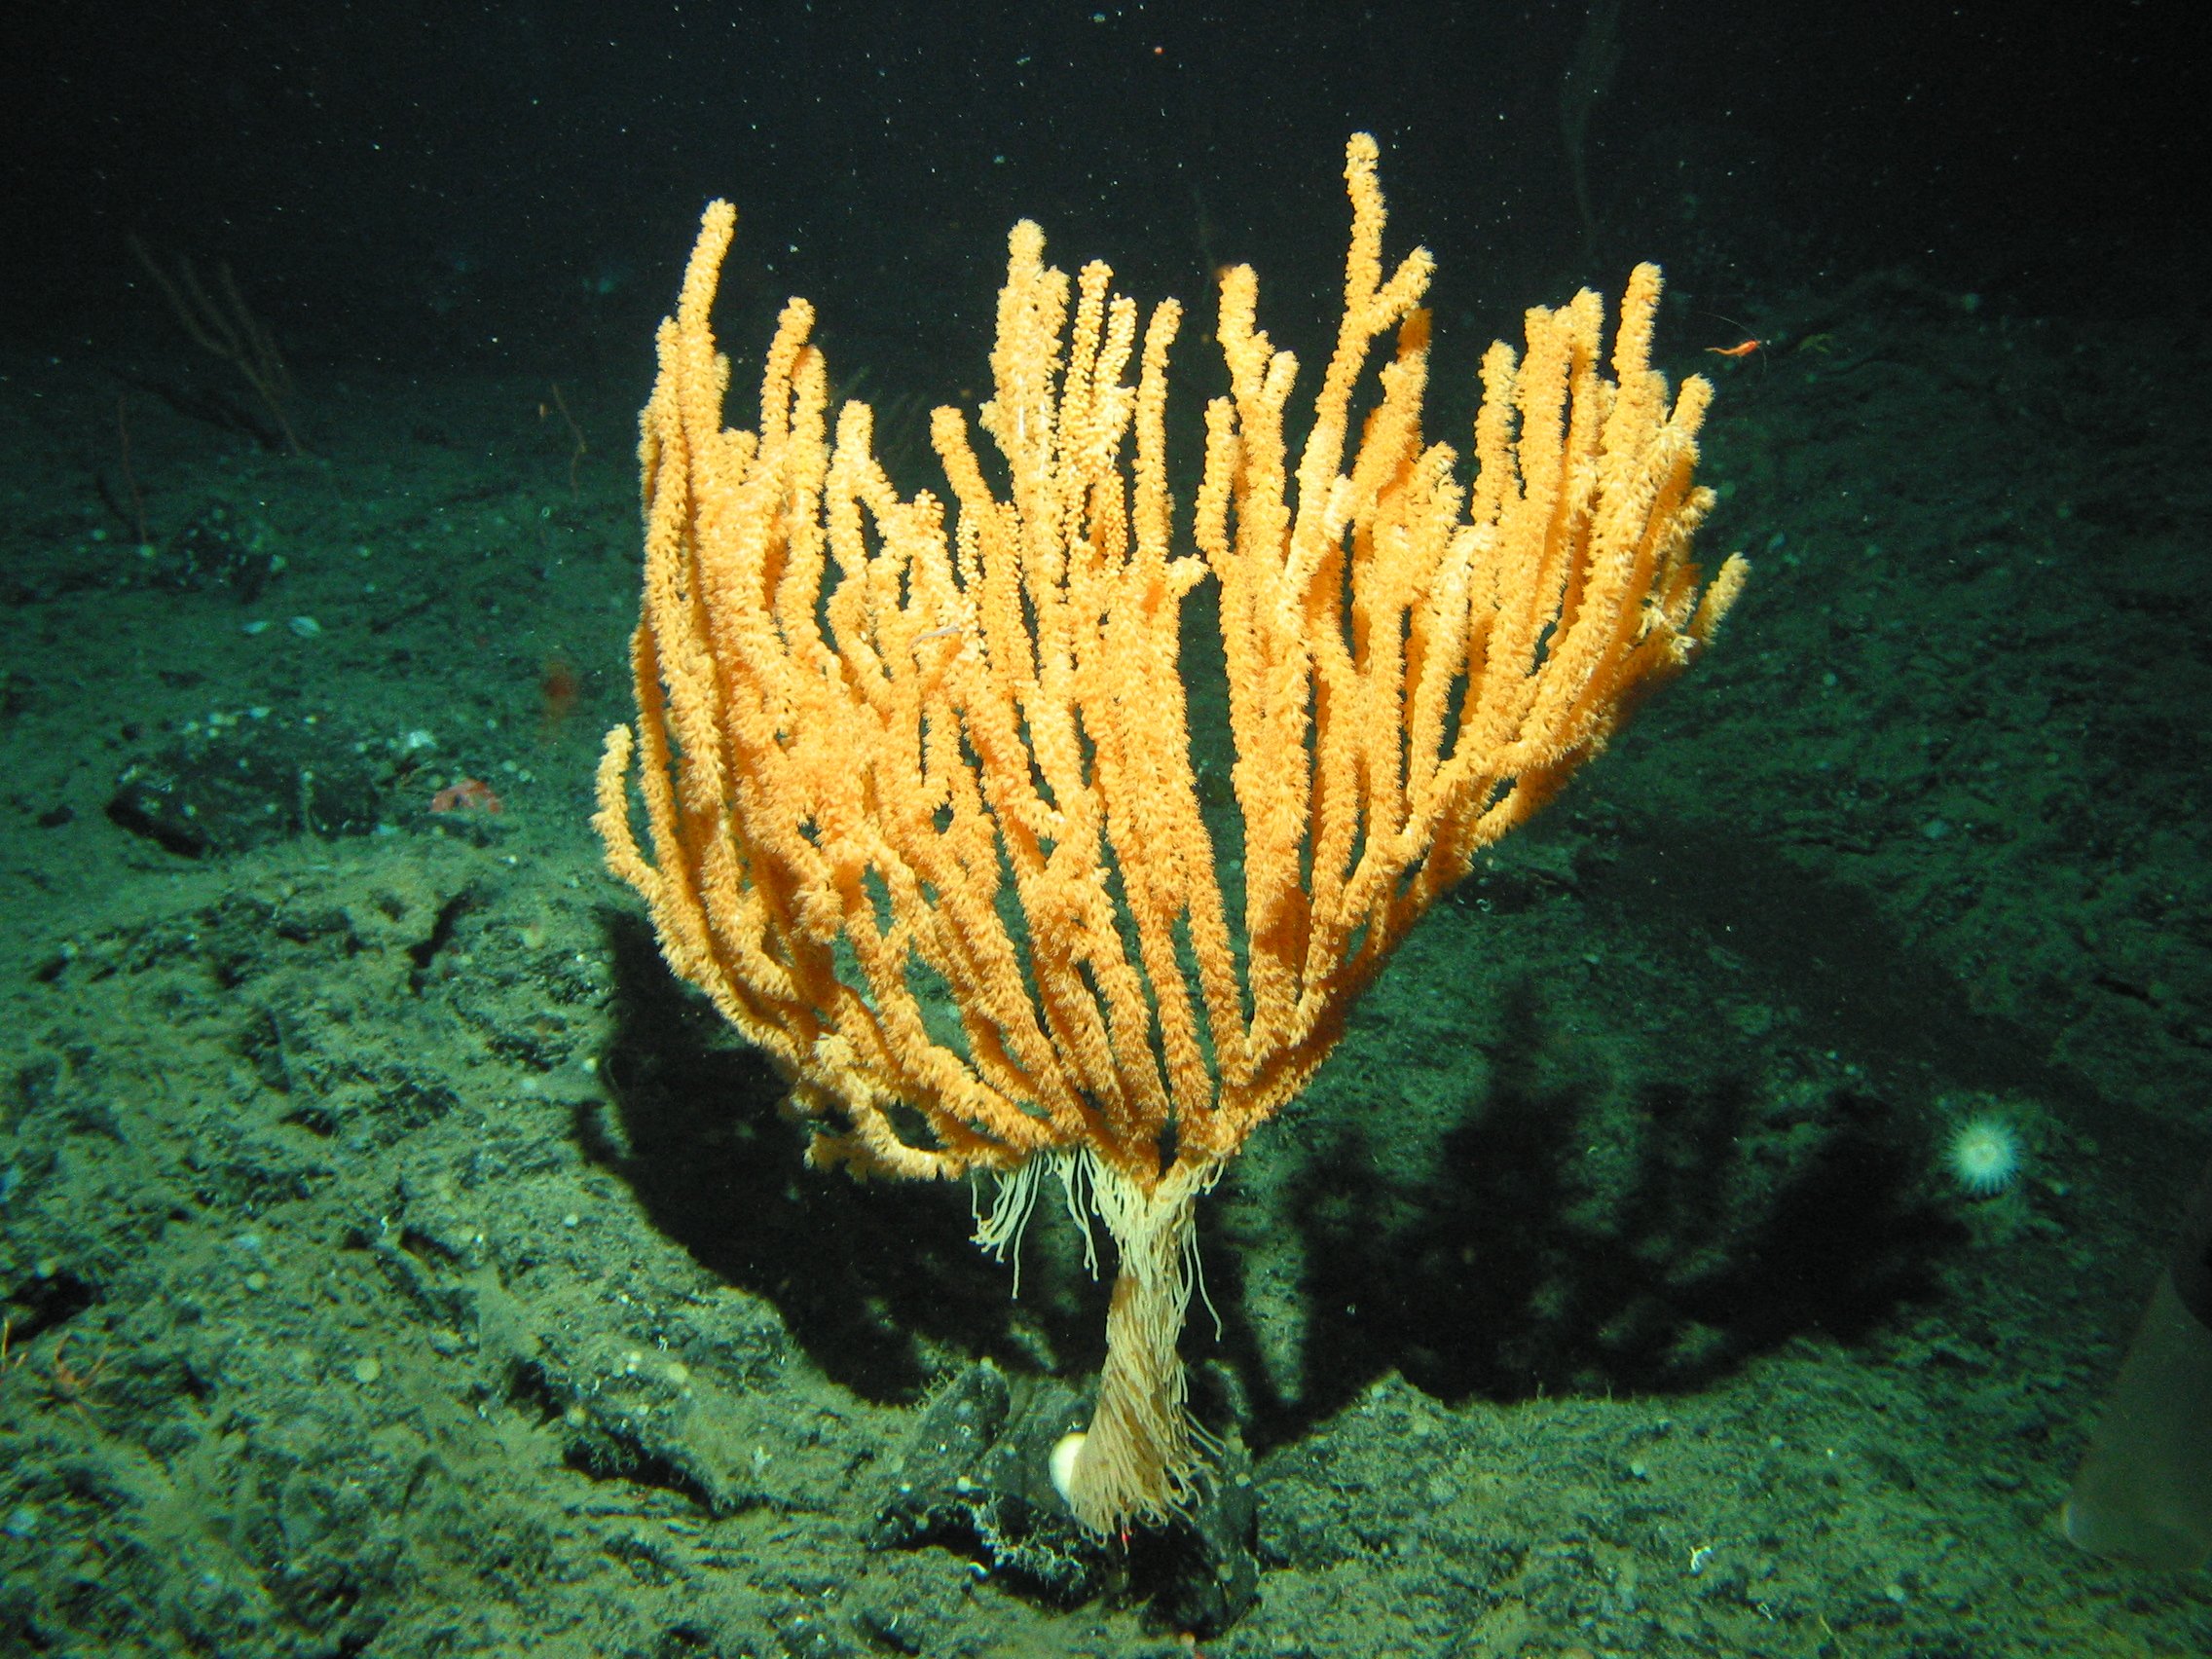 A bright orange branching coral sits on the seafloor. Credit: NOAA Ocean Exploration